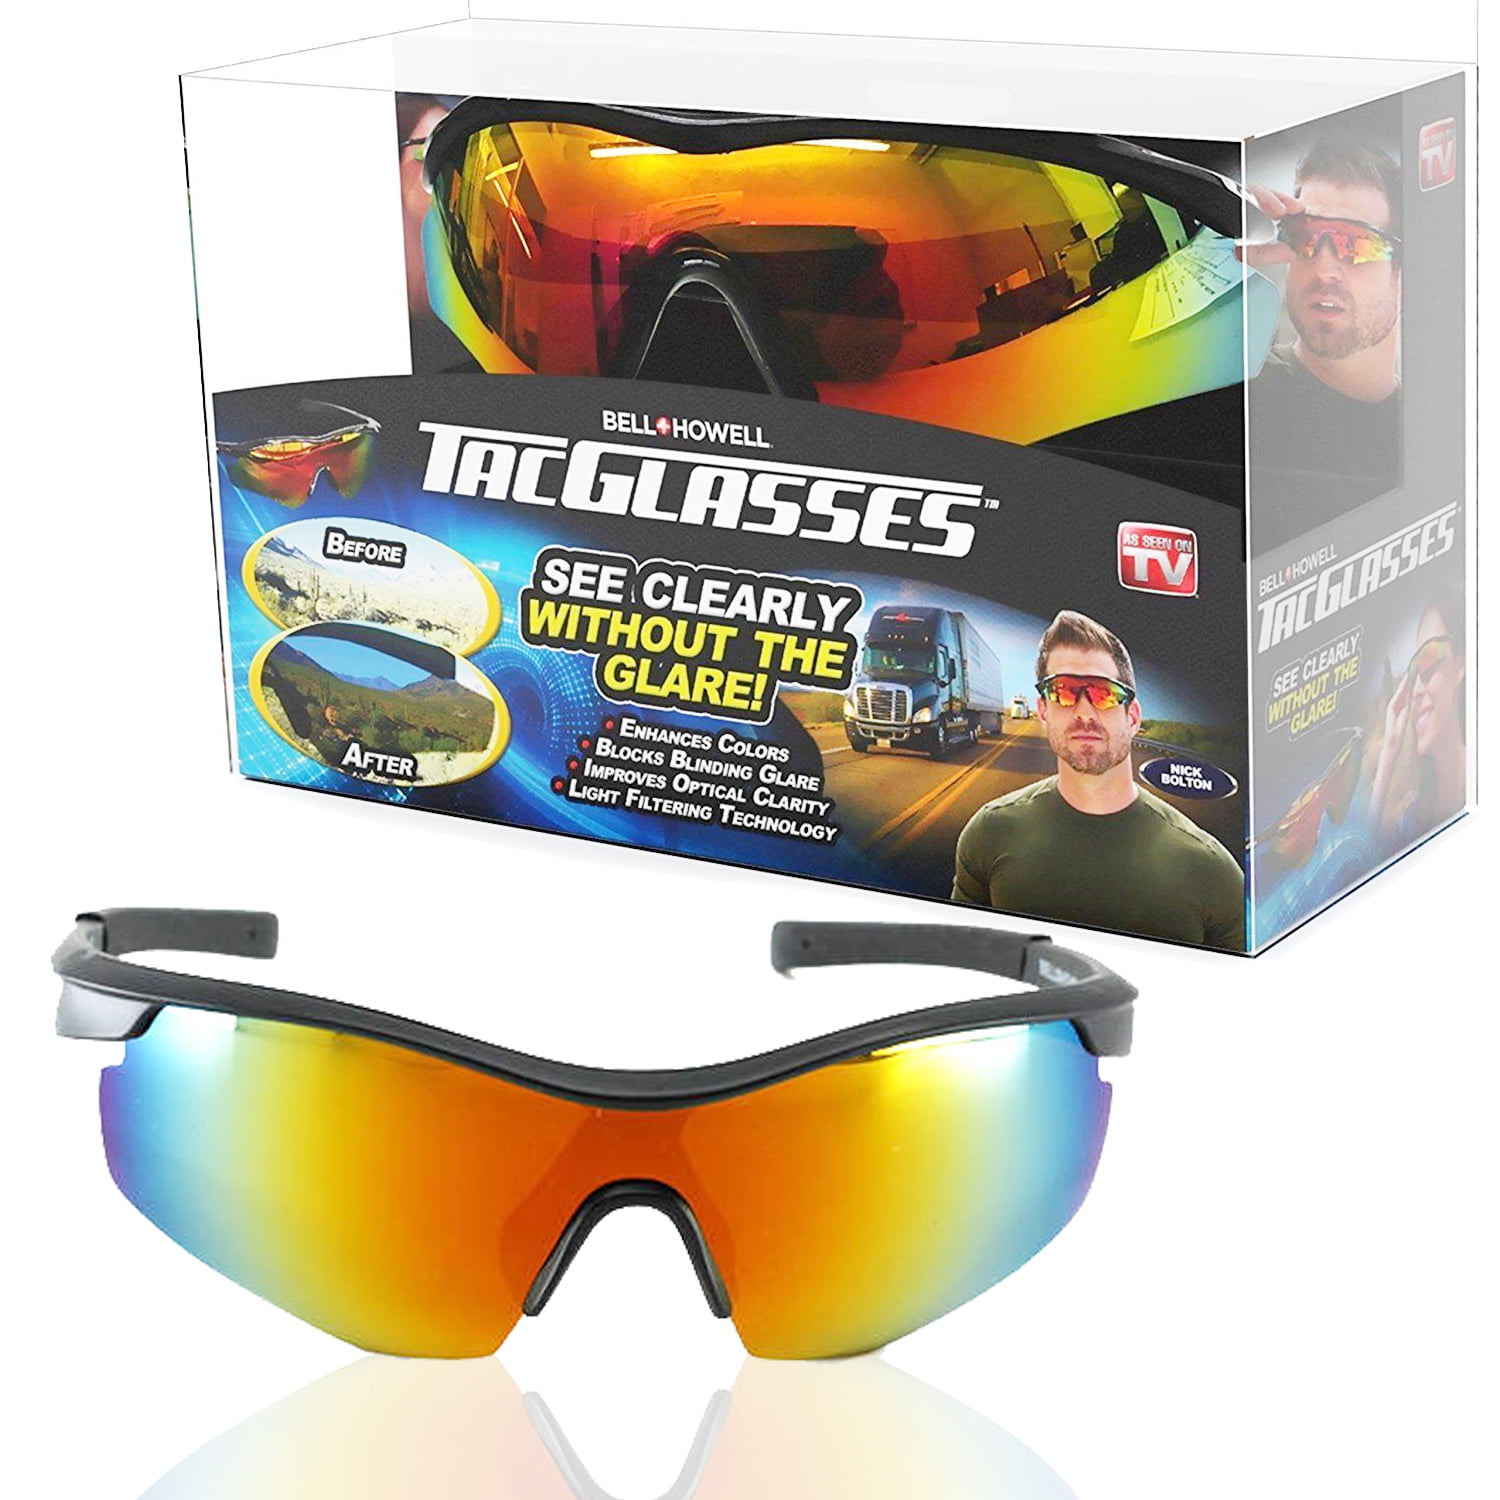 Tacglasses by Bell+Howell 3 Pack Polarized Sports Sunglasses Nightvision Glasses and Blue Vision Military Eyewear For Outdoors with Anti-Glare and UV Ray Protection One-size-fits-all As Seen On TV 